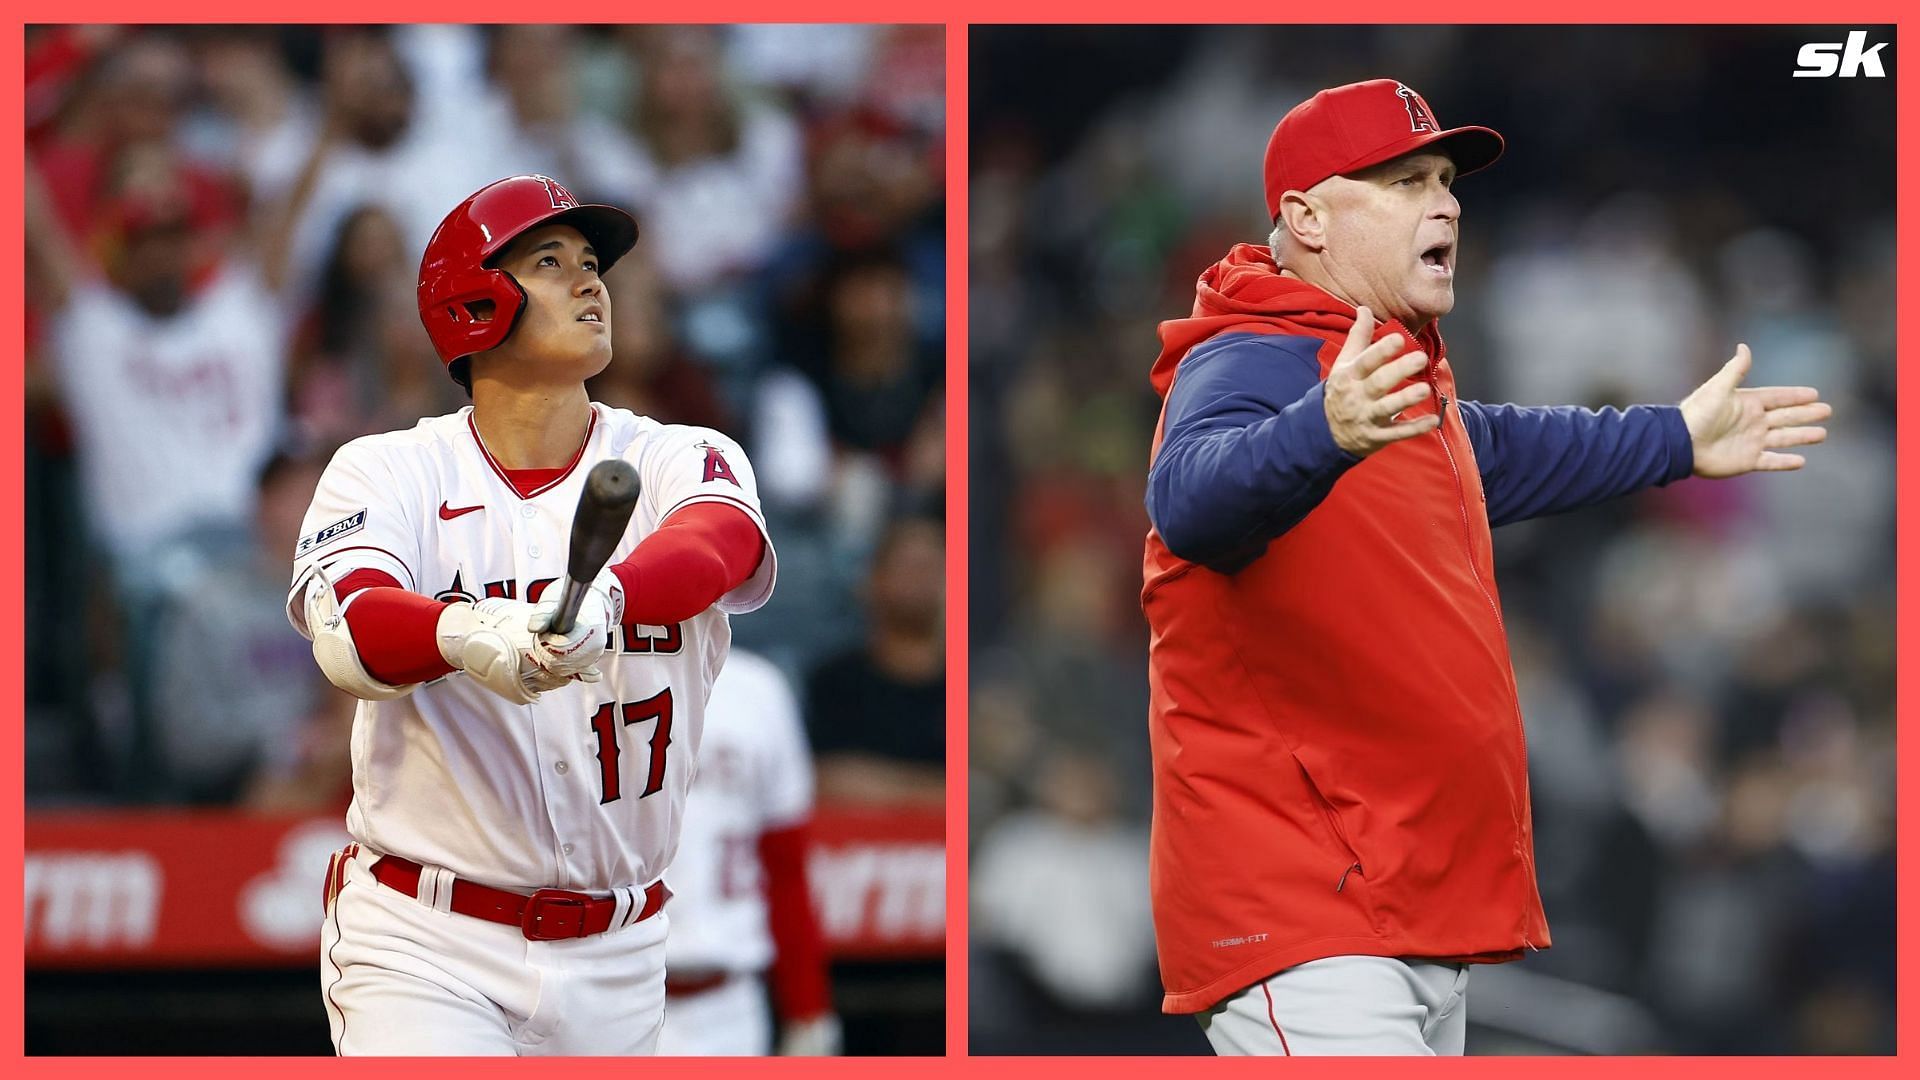 Phil Nevin believes it is usual business if the Los Angeles Angels decide to keep Shohei Ohtani in the team.